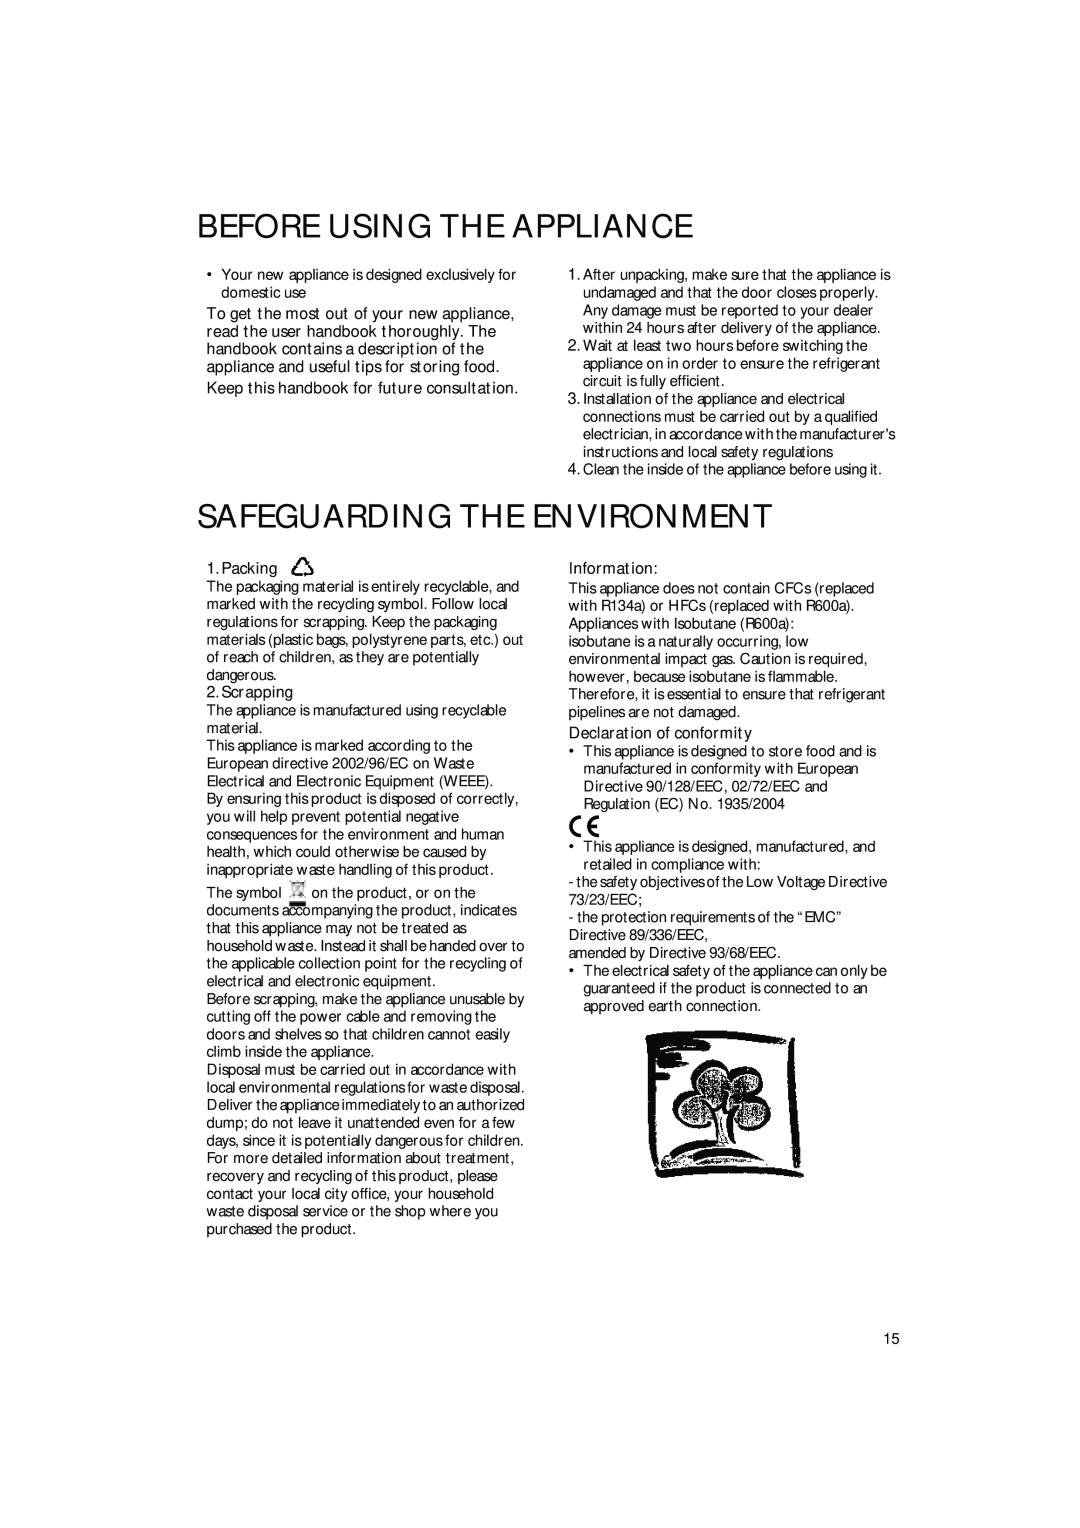 Smeg FR220APL manual Before Using The Appliance, Safeguarding The Environment, Keep this handbook for future consultation 